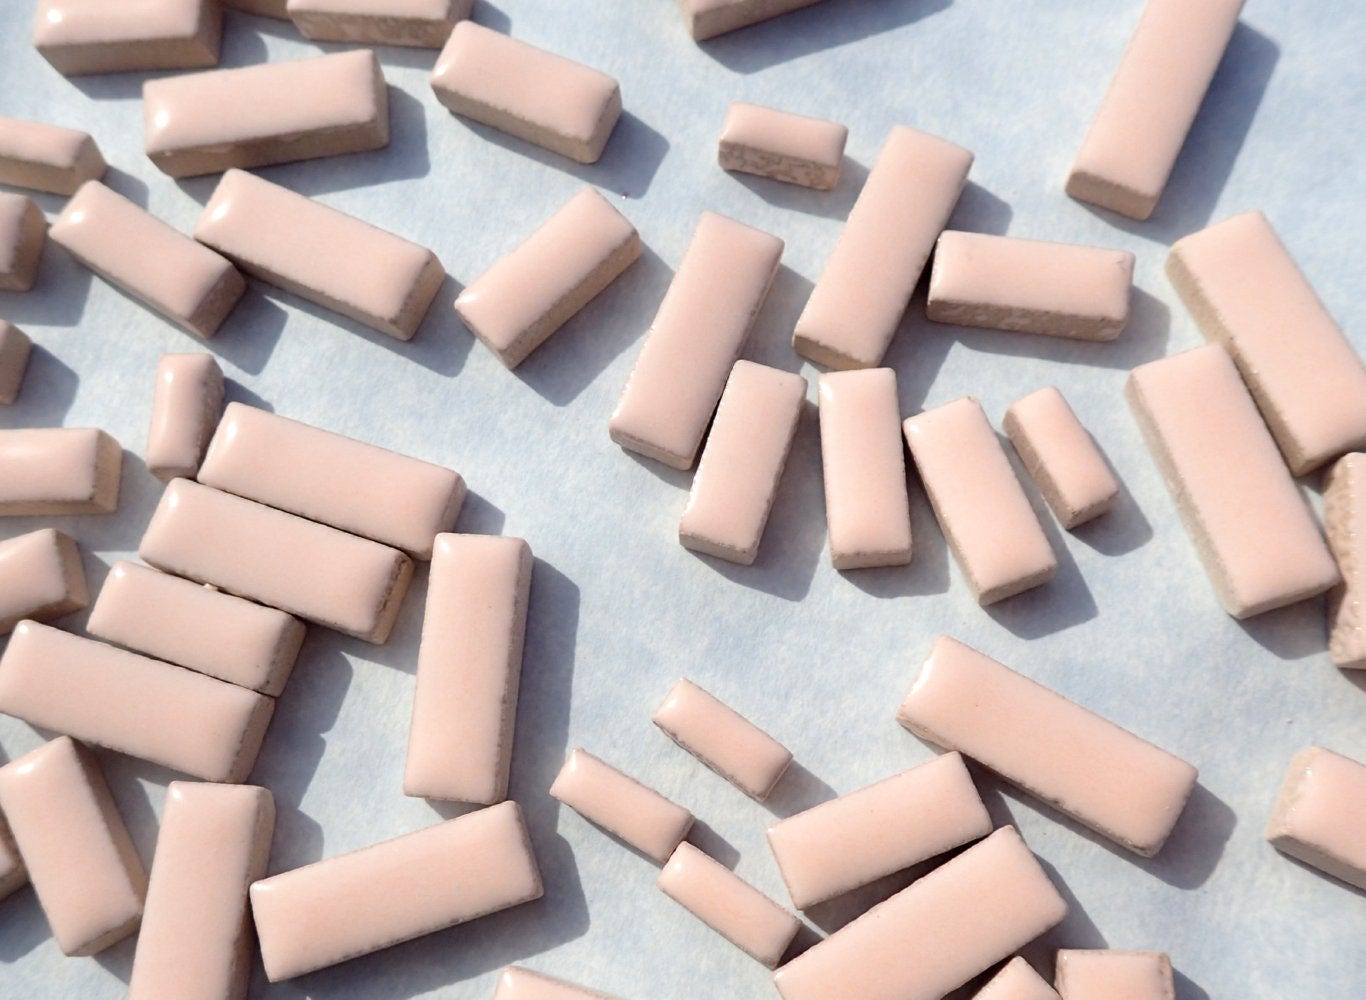 Pink Mini Rectangles Mosaic Tiles - 50g Ceramic in Mix of 3 Sizes 3/8" and 5/8" and 3/4" in Light Pale Pink